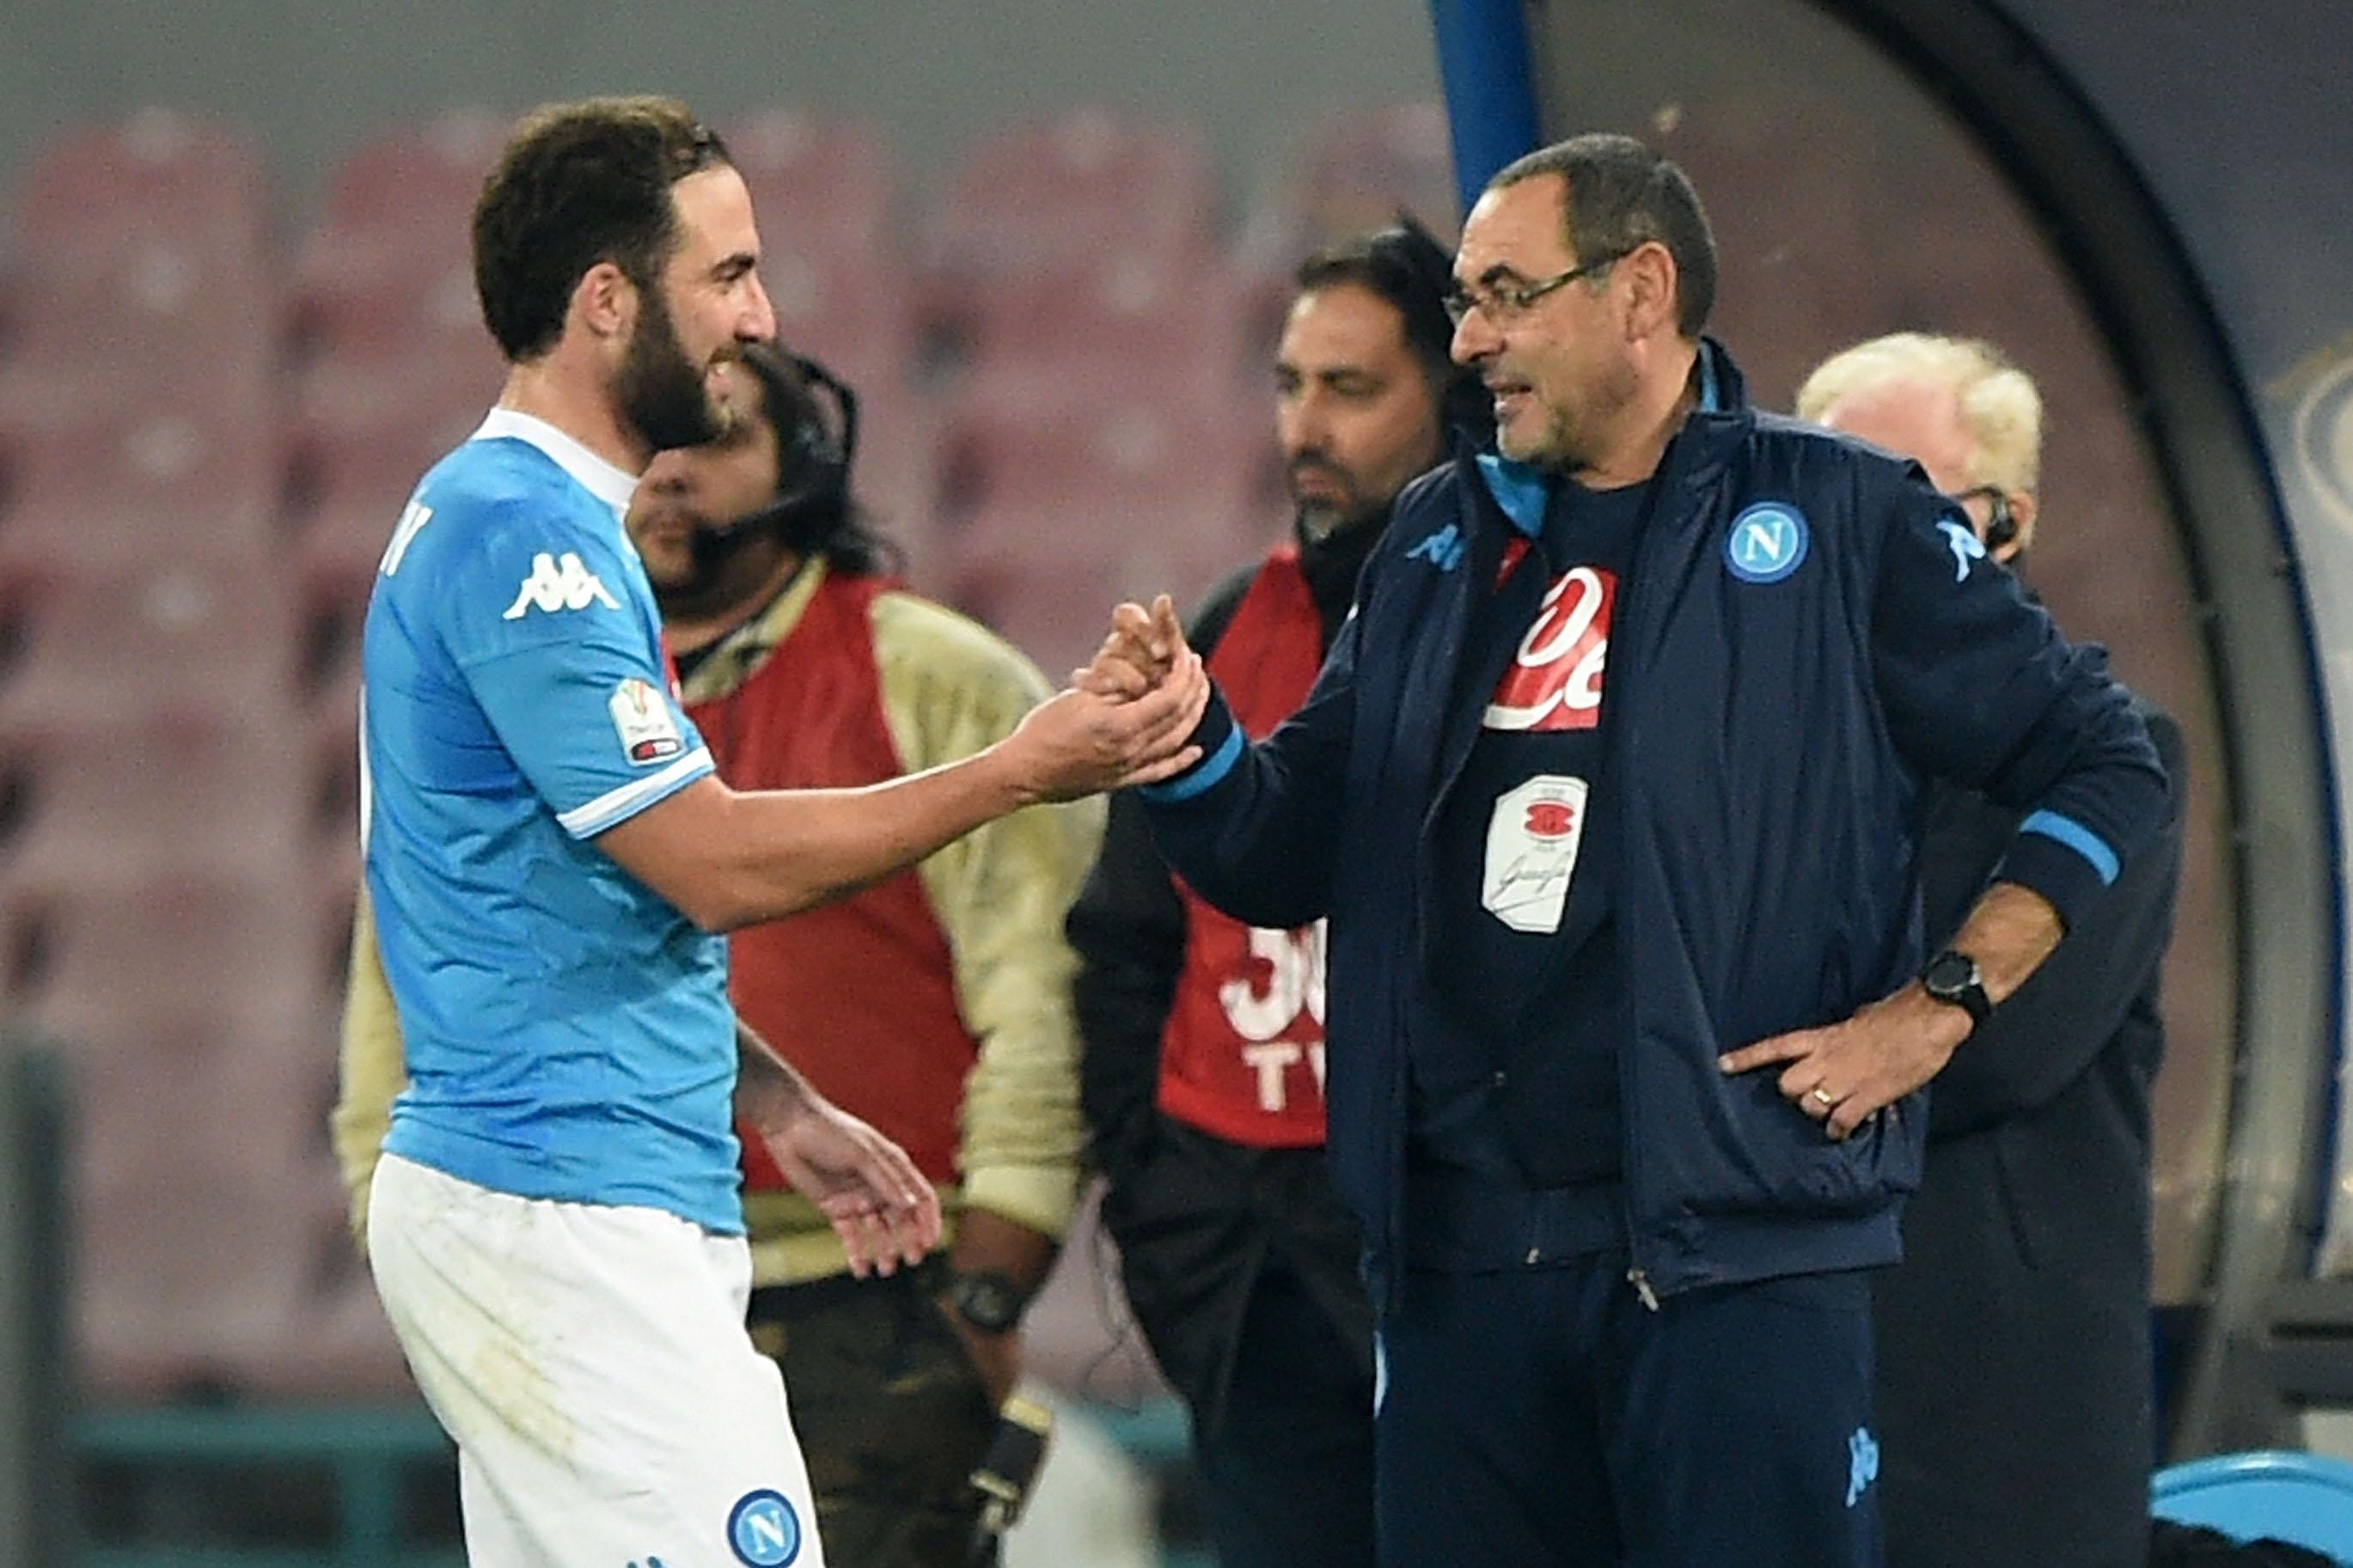 Chelsea News: Blues to reportedly sign Gonzalo Higuain for £53m and deal will be completed on Wednesday